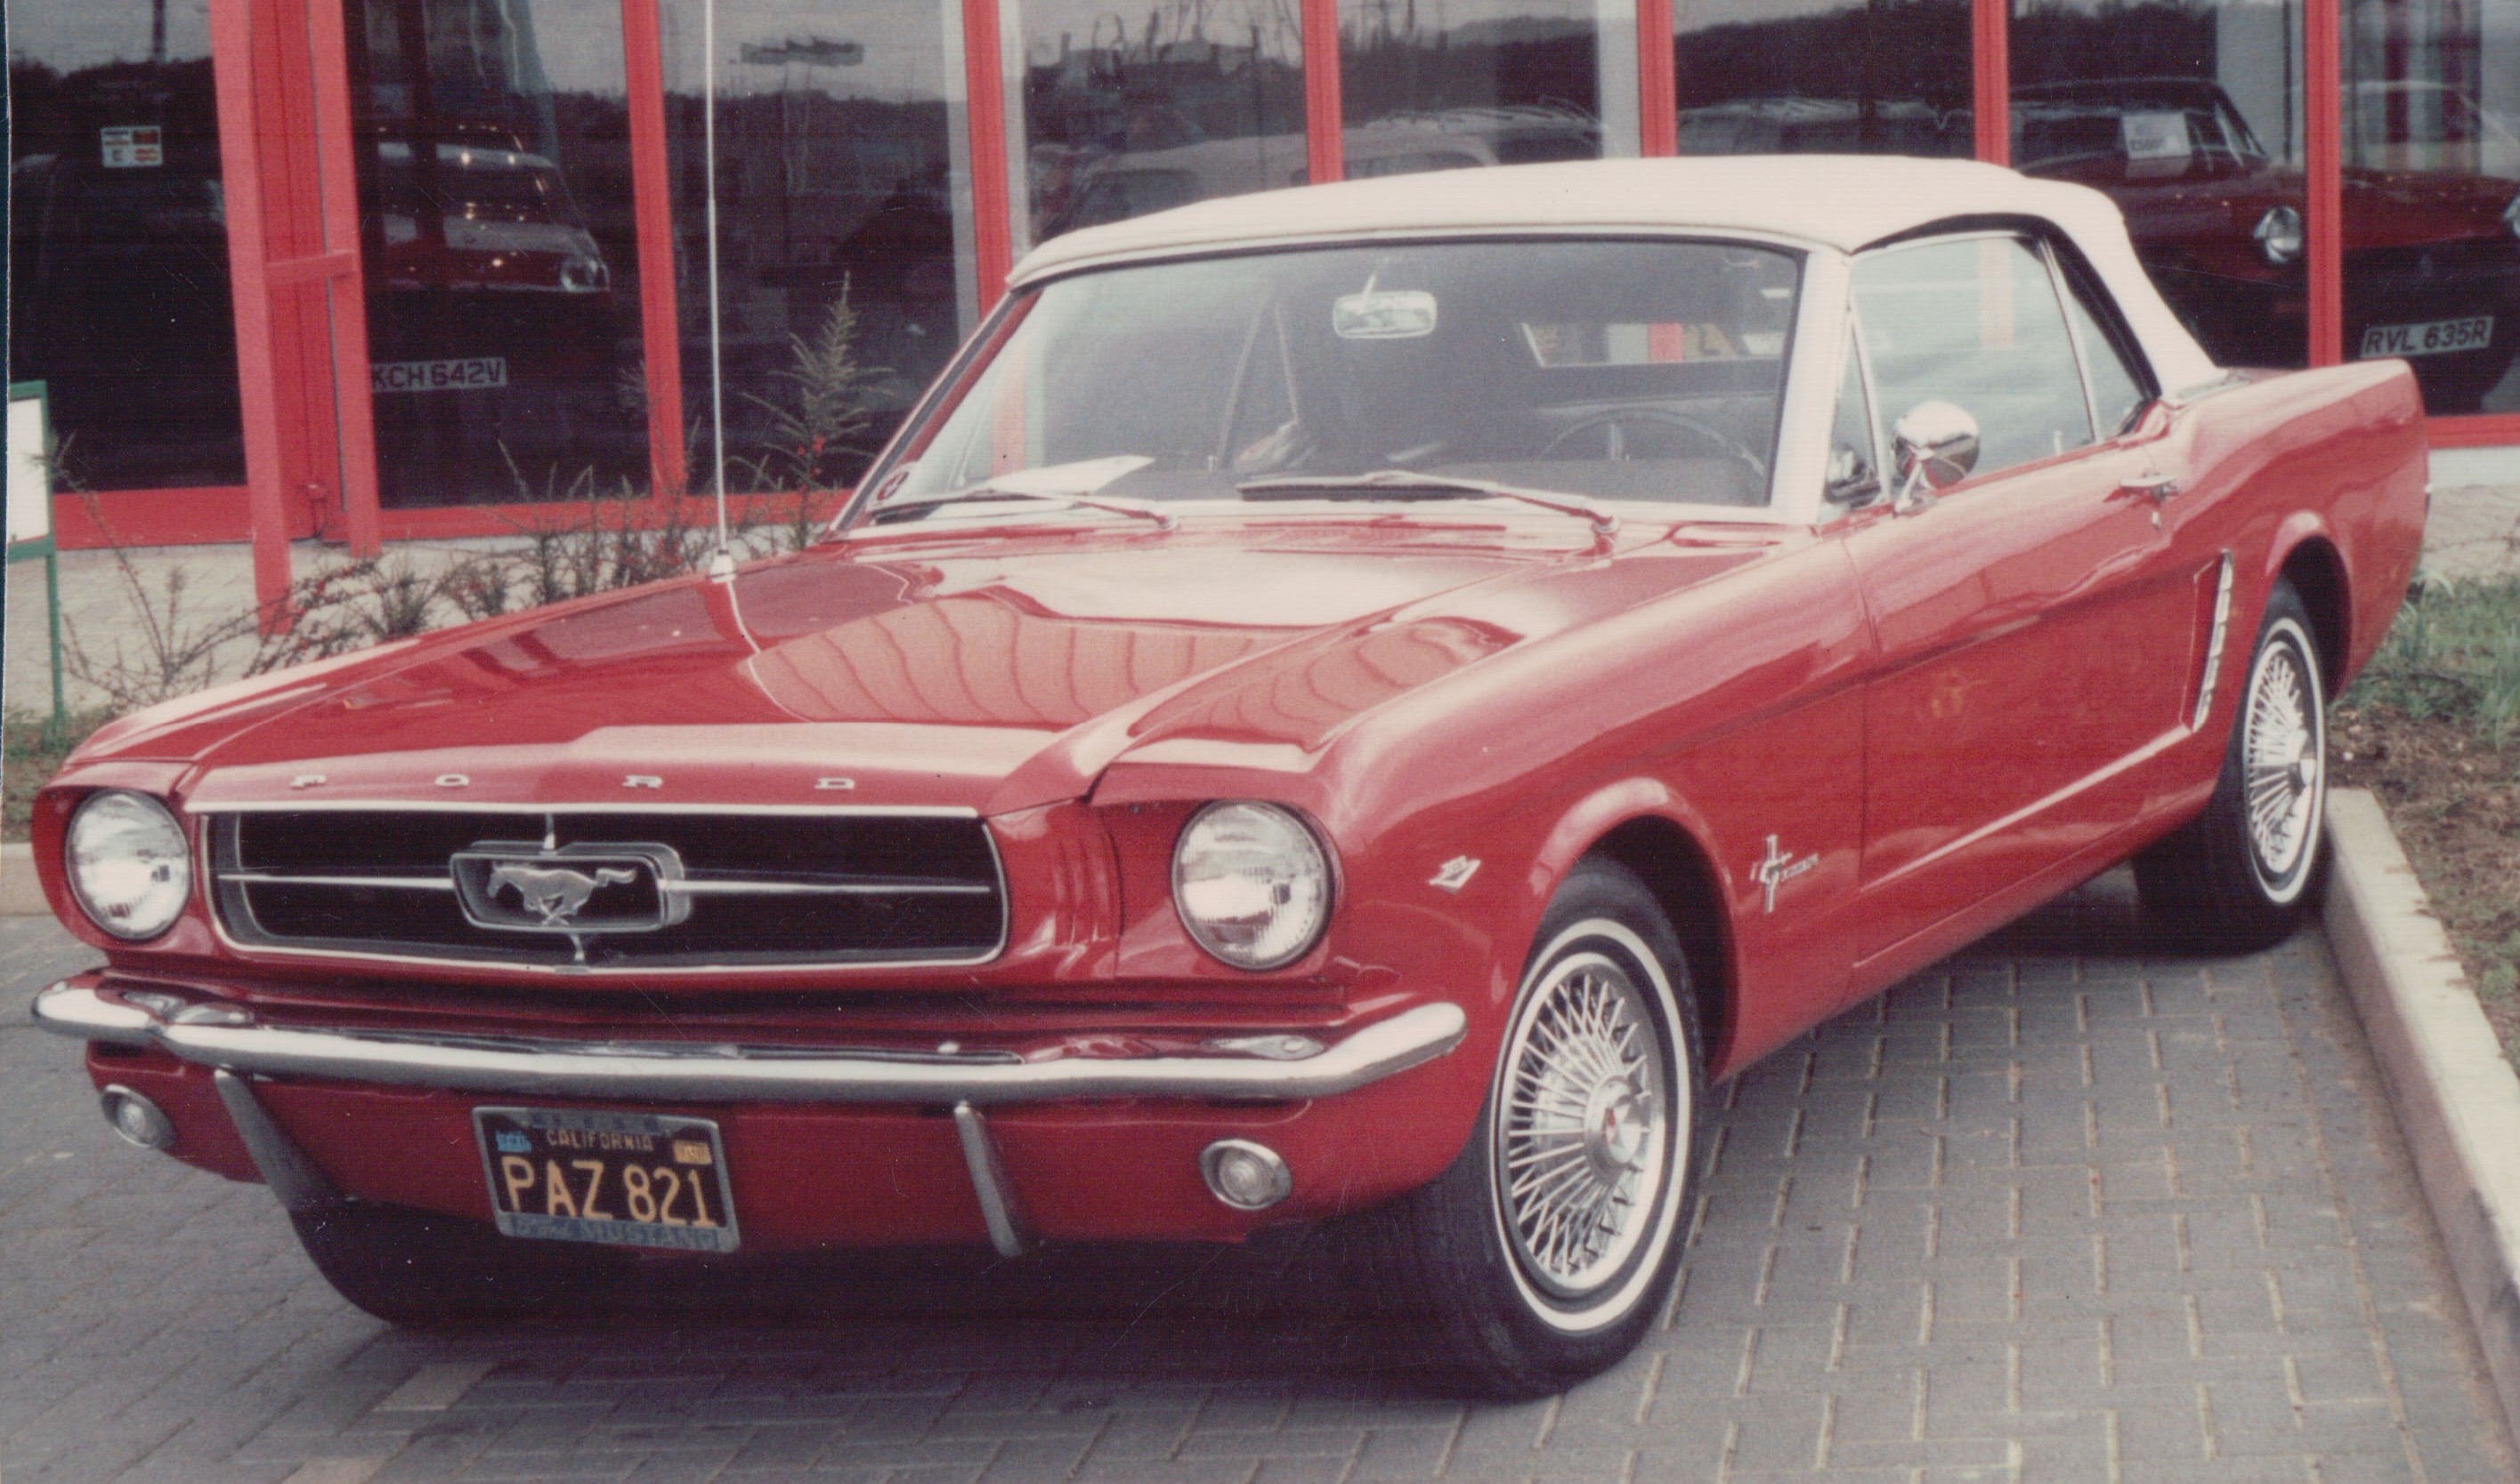 1964 4.7 Mustang, Corby, 1992